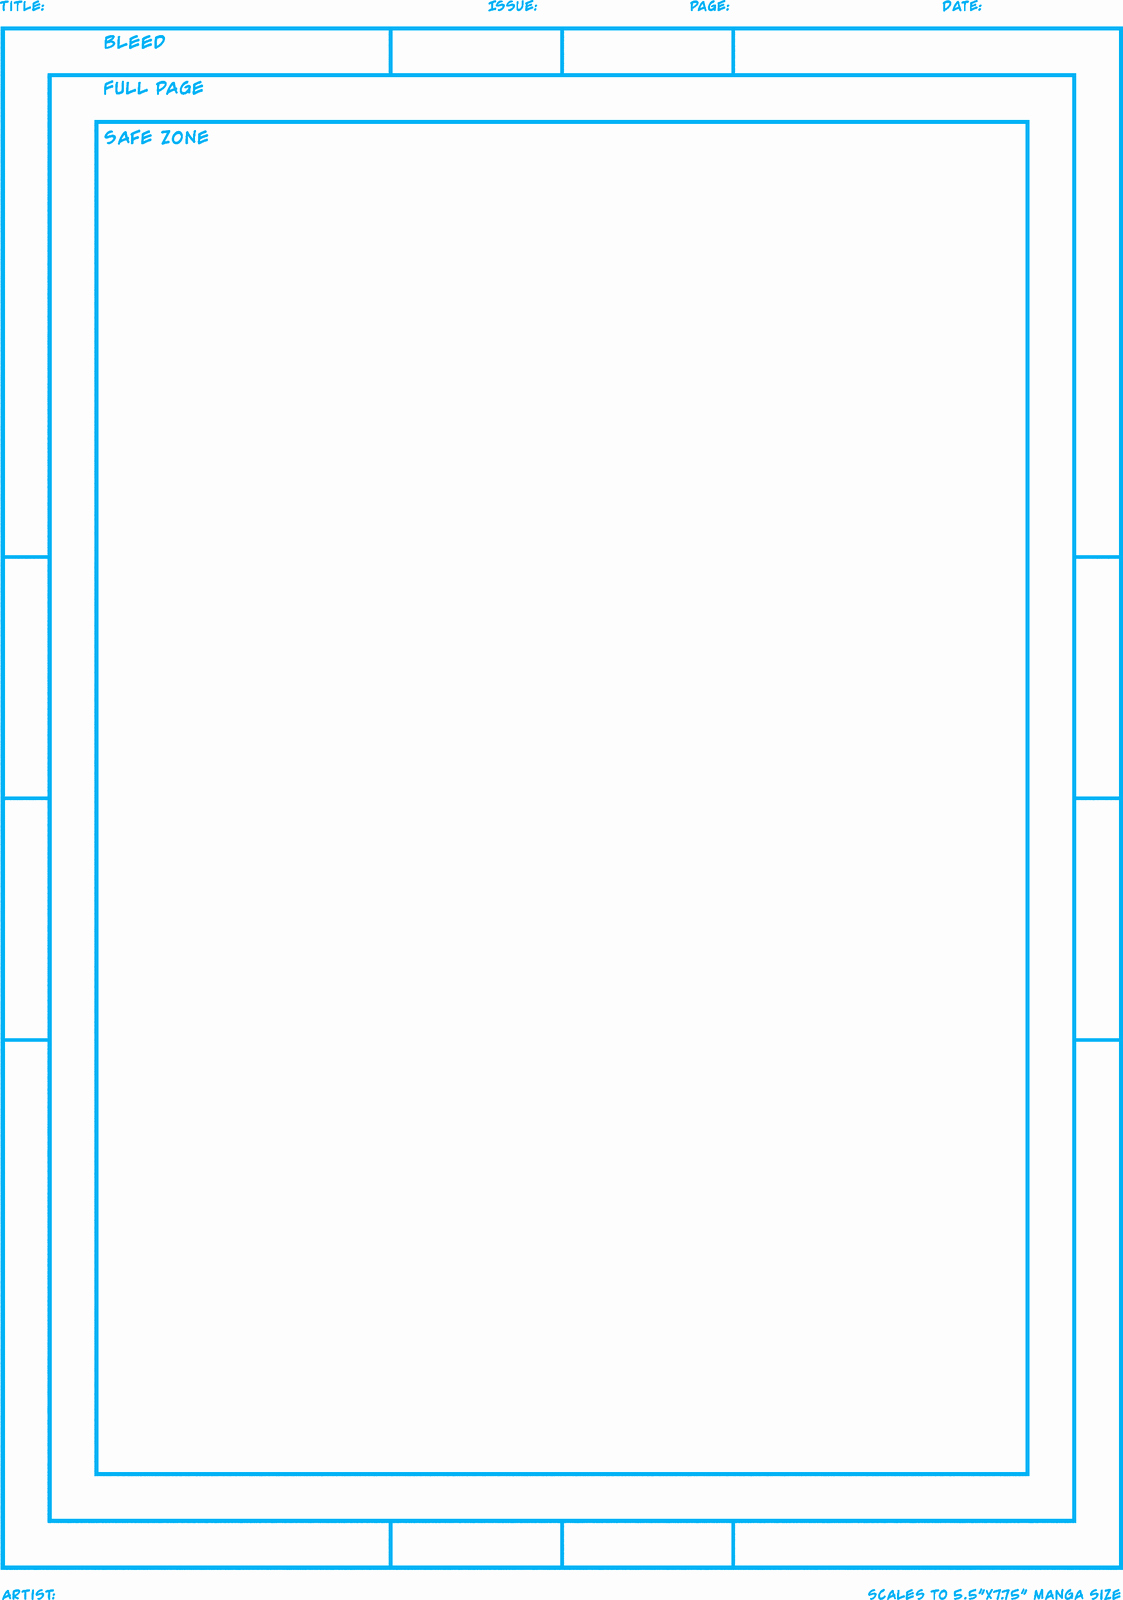 Comic Book Page Template Inspirational Jesse Acosta S Blog Build Your Own Mini Ic